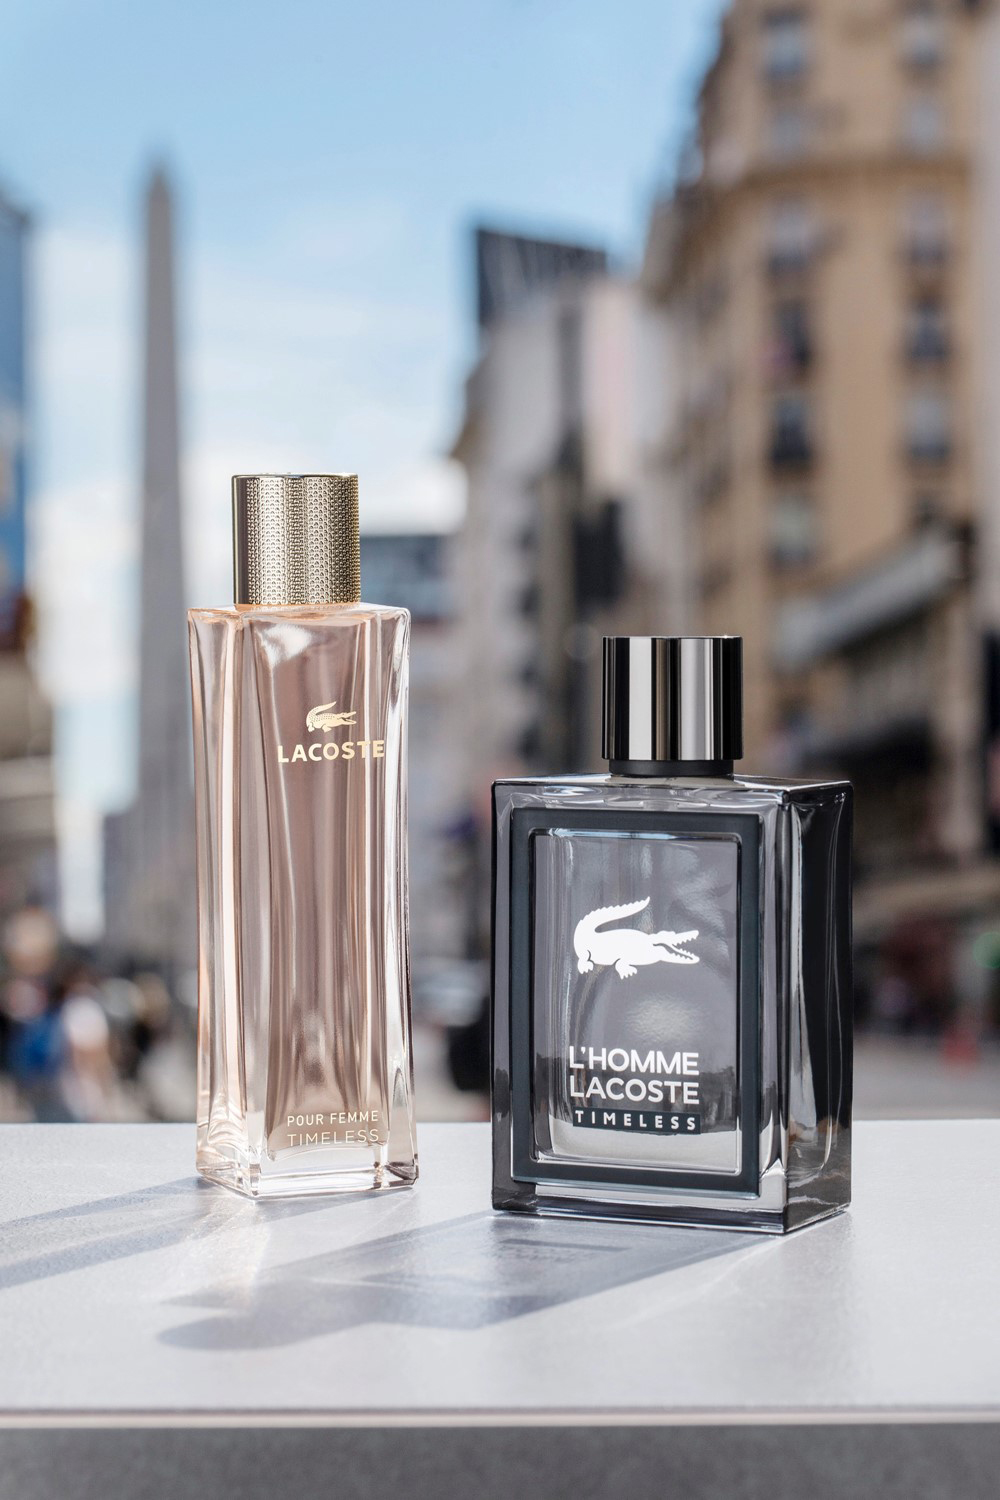 L`Homme Lacoste Timeless